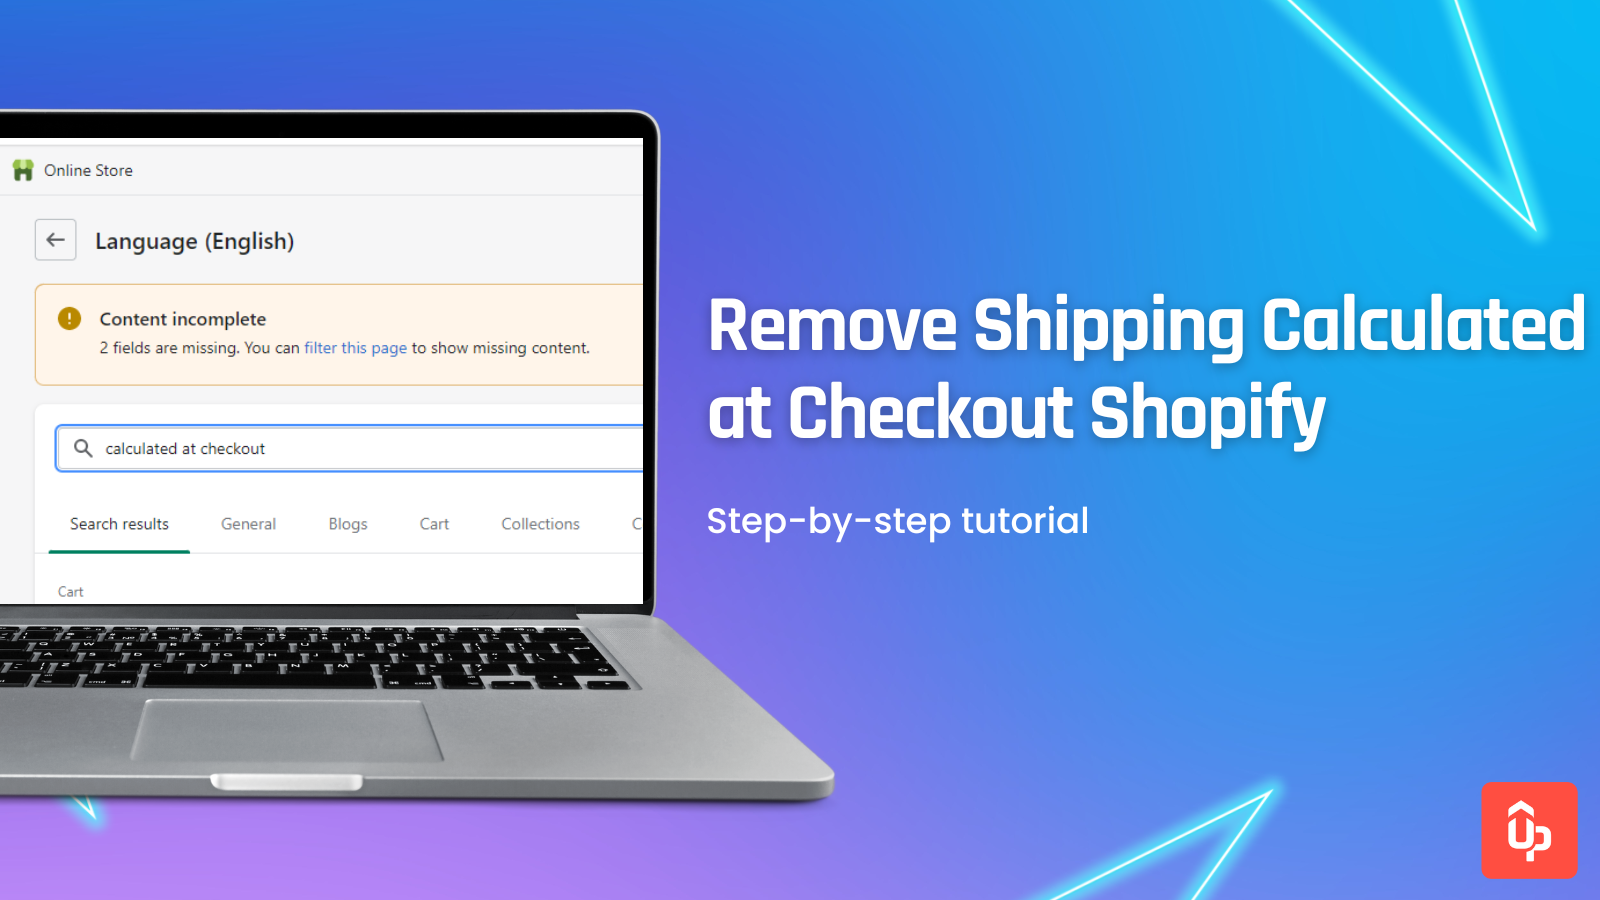 Remove Shipping Calculated at Checkout Shopify blog post by uppromote